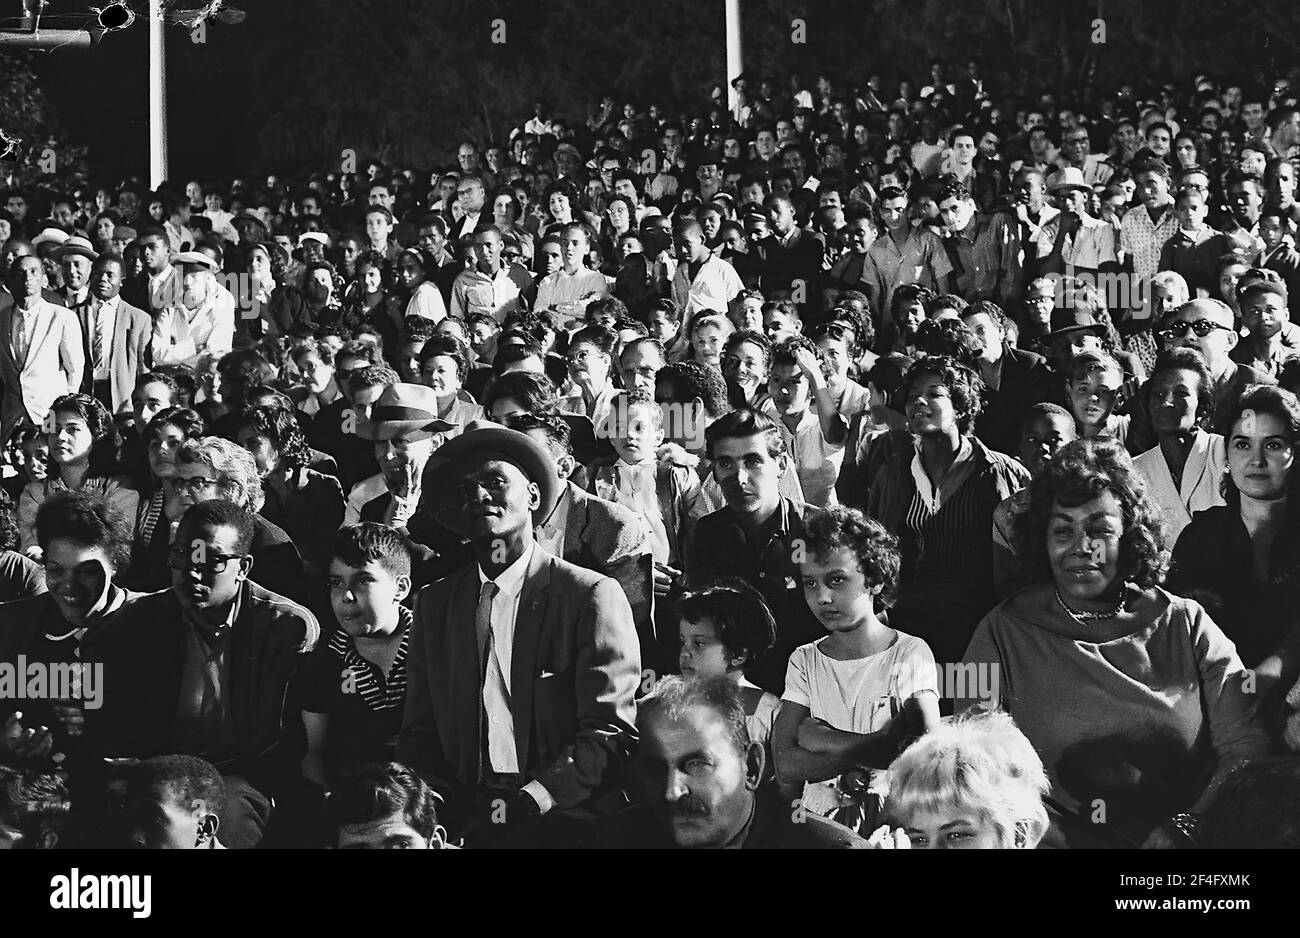 Crowd watching Miss Carnaval, Havana, Cuba, 1964. From the Deena Stryker photographs collection. () Stock Photo